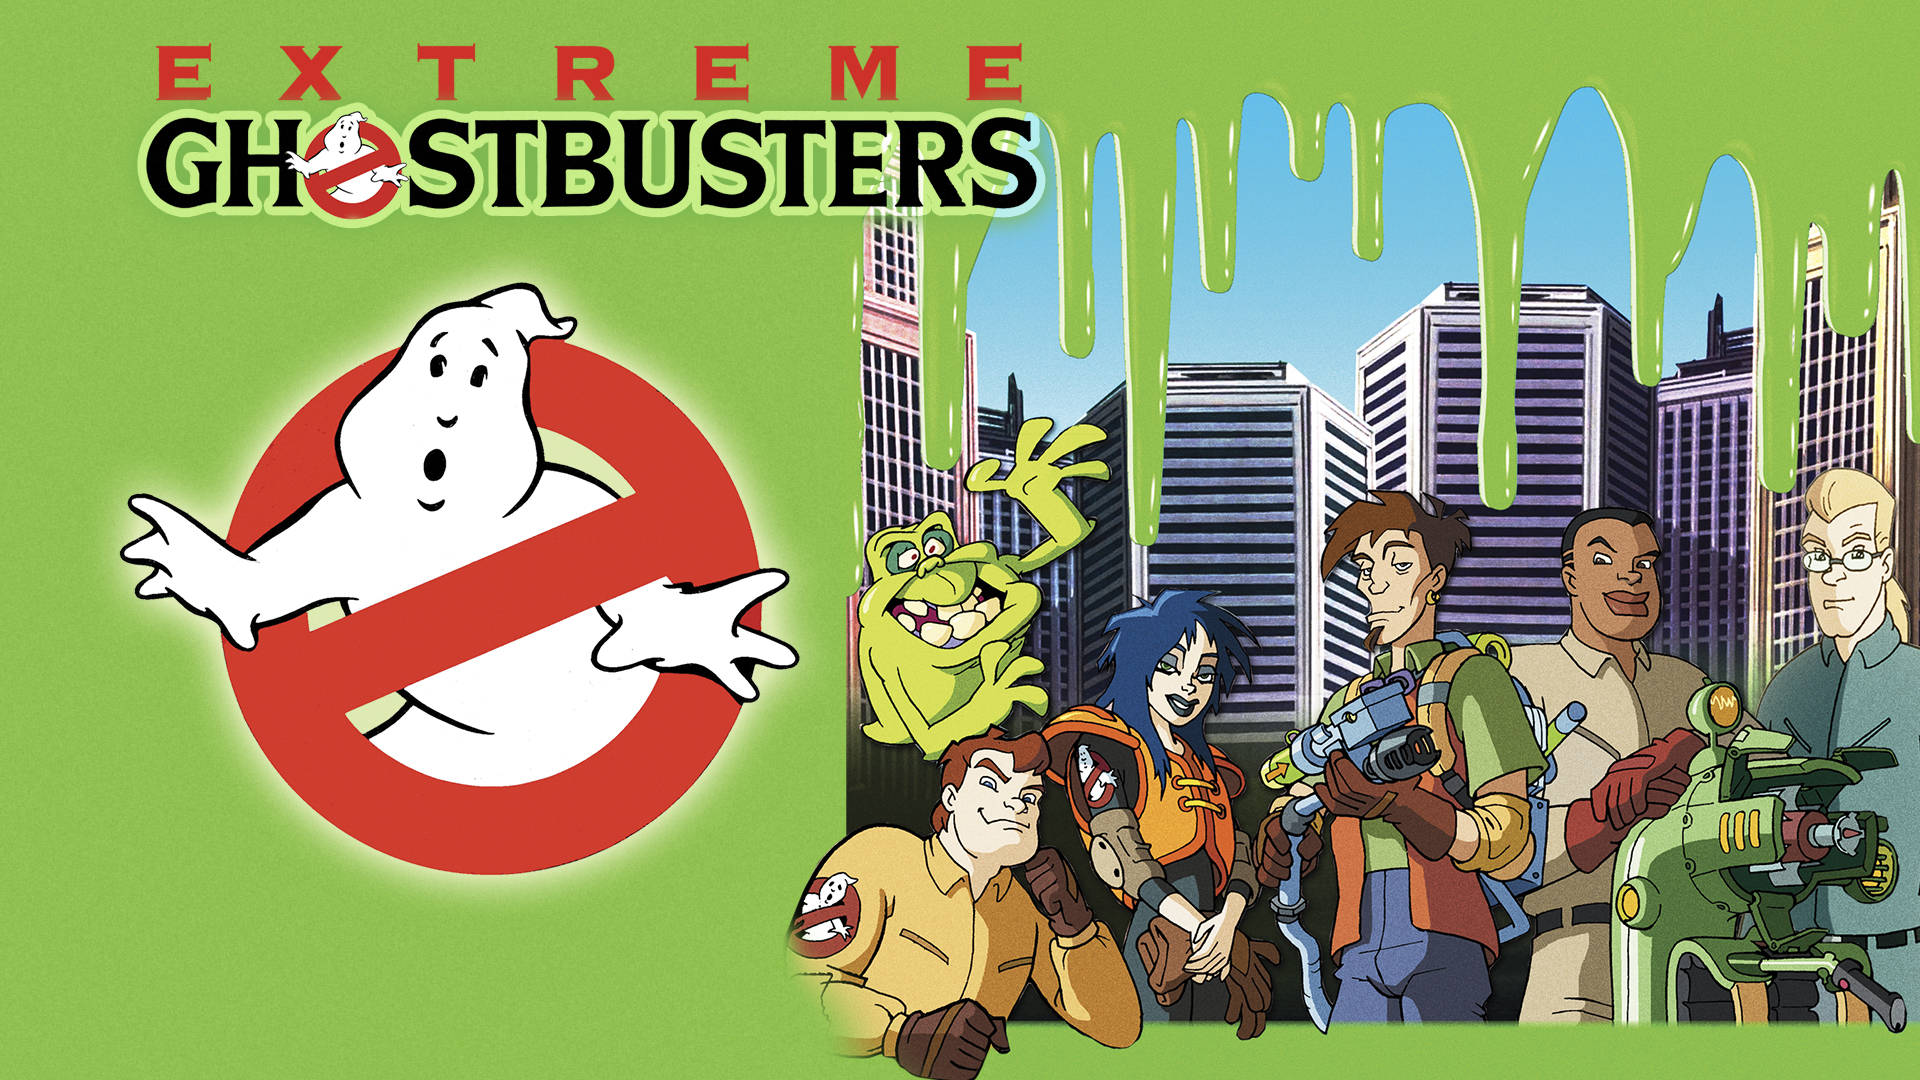 Who You Gonna Call? The Ghostbusters! Background